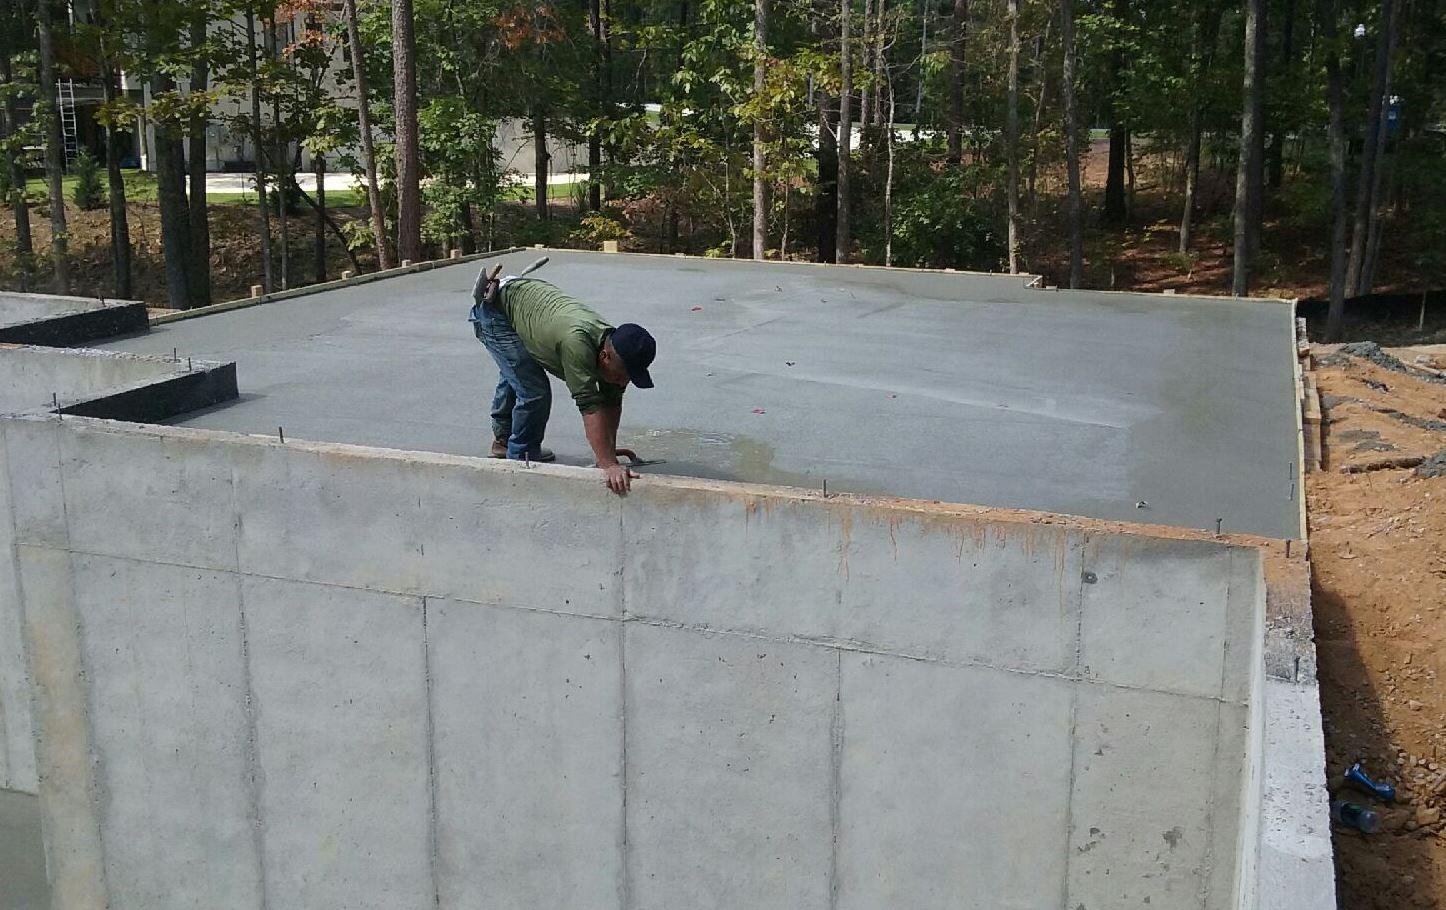 Concrete Foundation Laying done by NM Construction Group in Hoover, AL